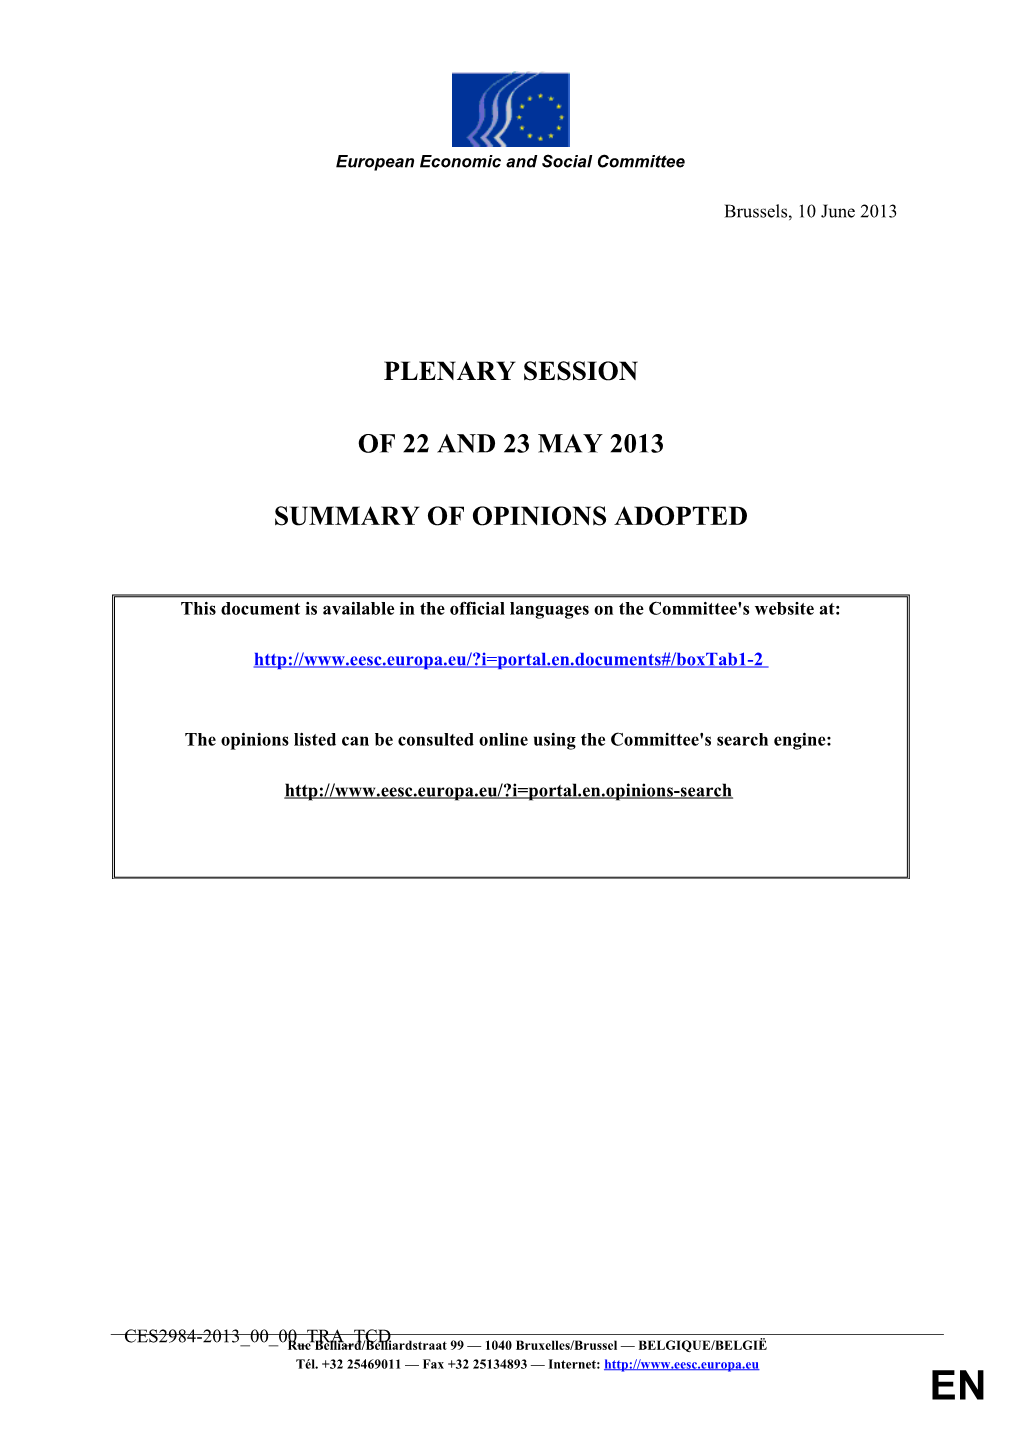 Synthese of Opinions Adopted May Session